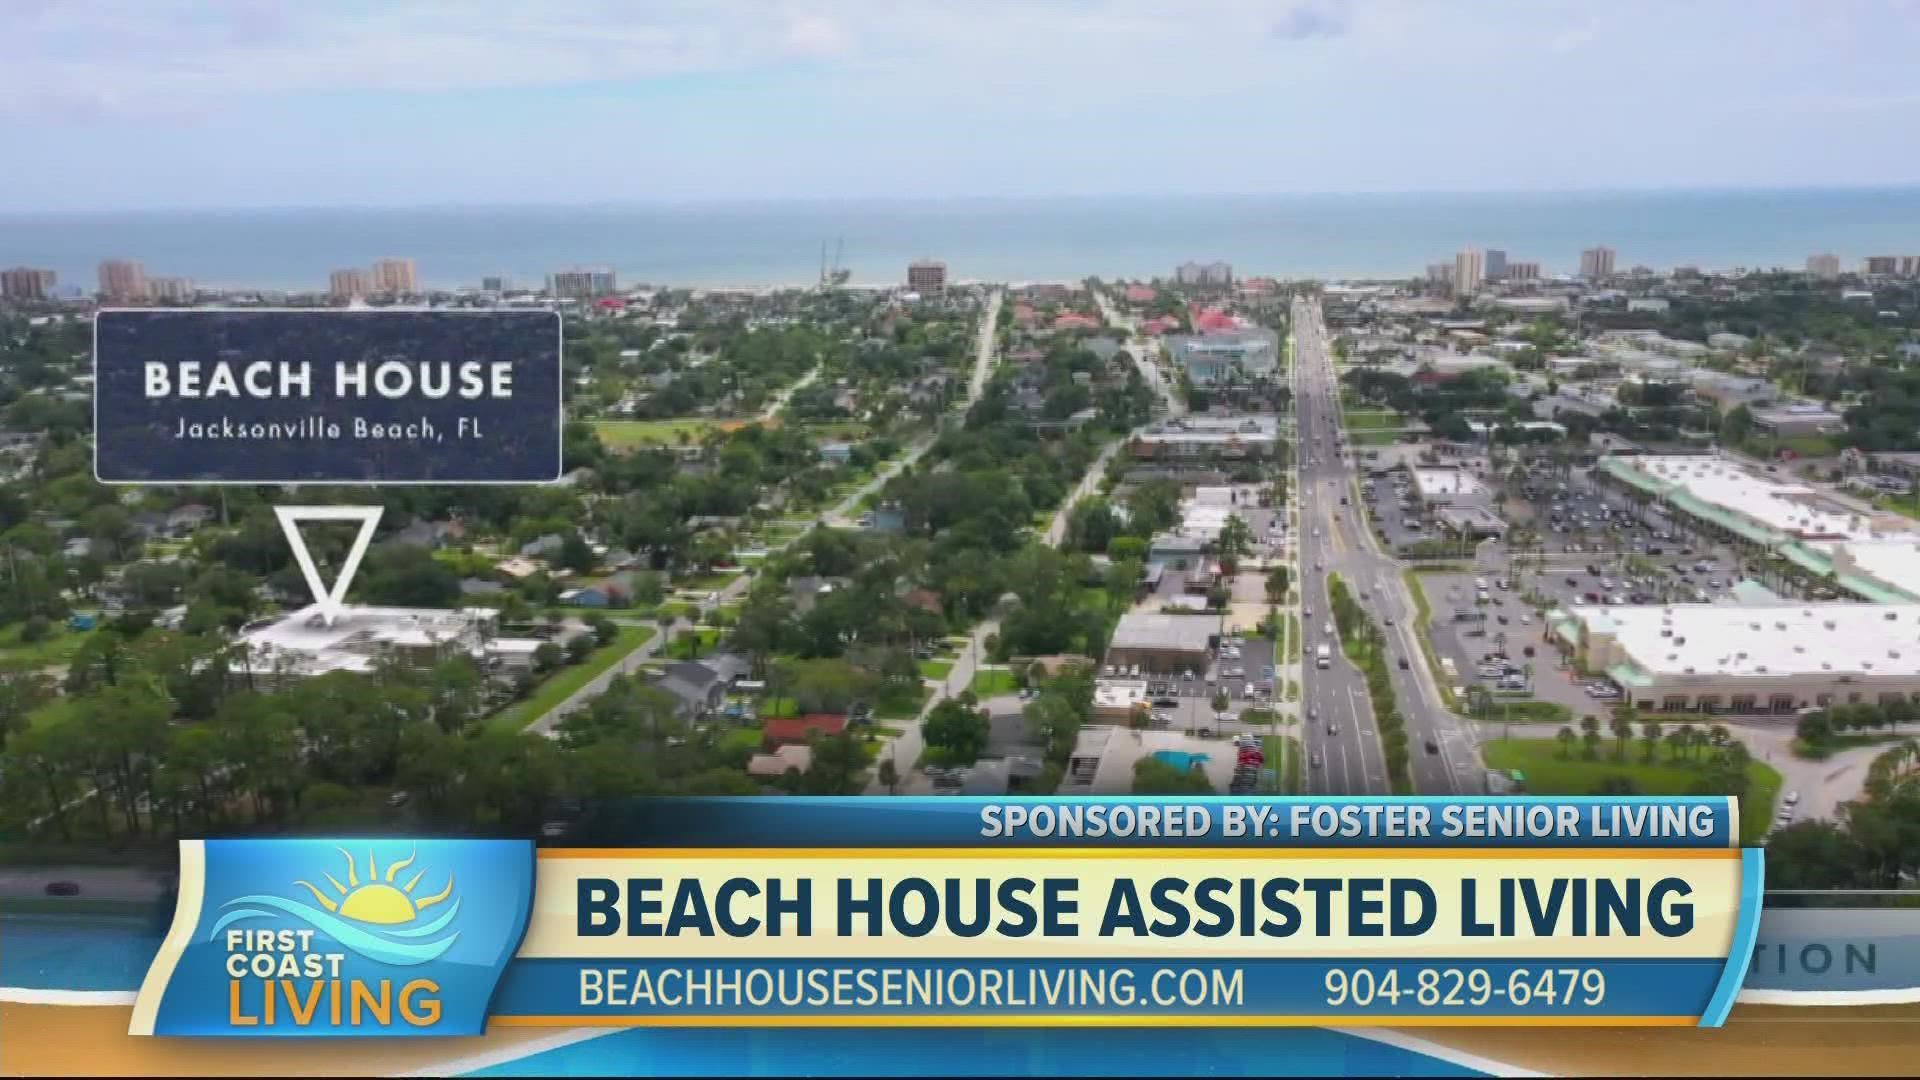 Beach House offers 64 assisted living apartments and 20 memory care residences.